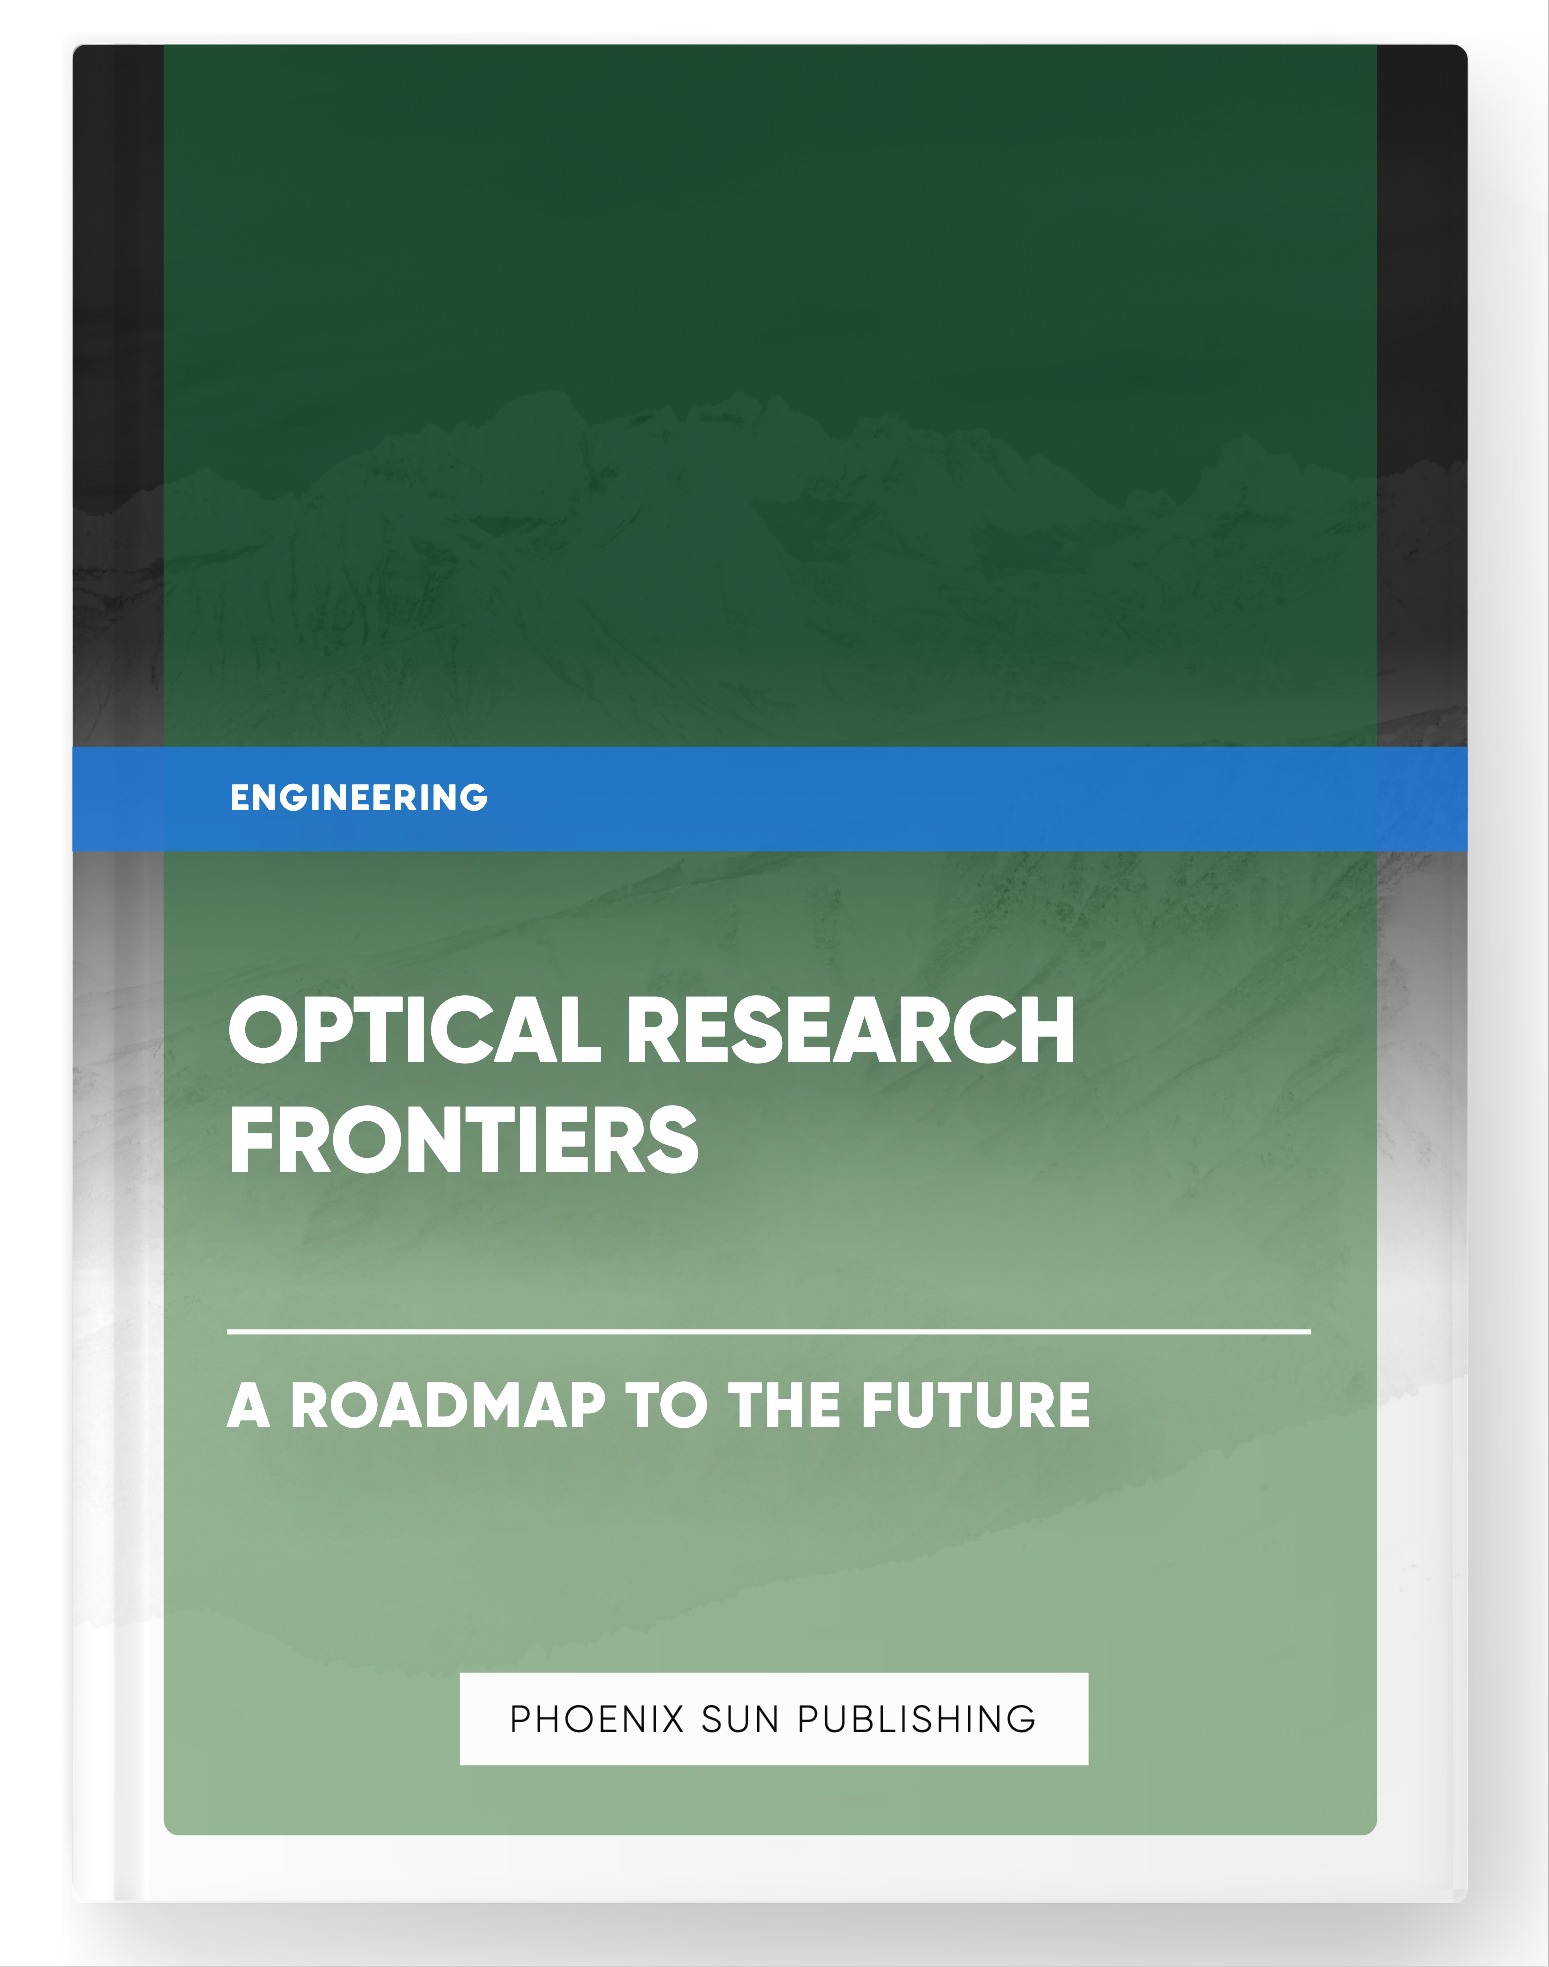 Optical Research Frontiers – A Roadmap to the Future